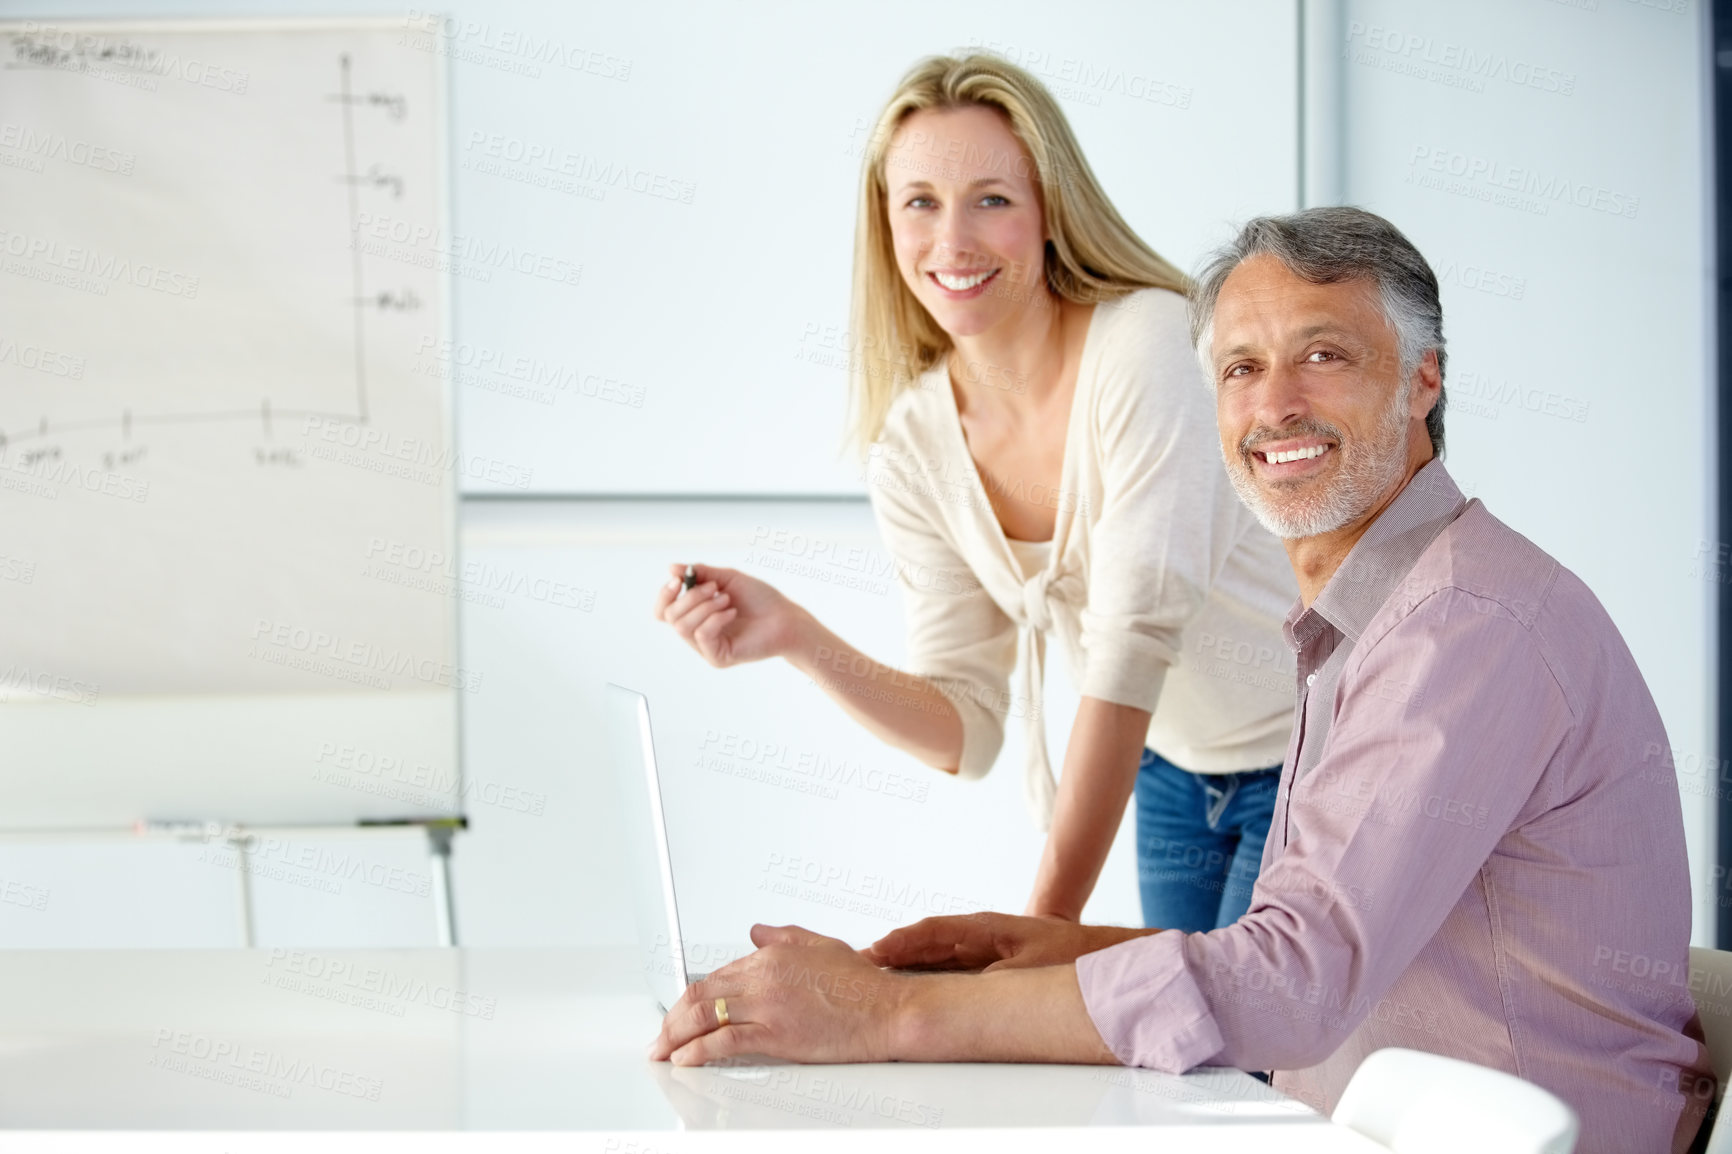 Buy stock photo Two smiling coworkers discussing business in a meeting using a flip chart and laptop - Portrait